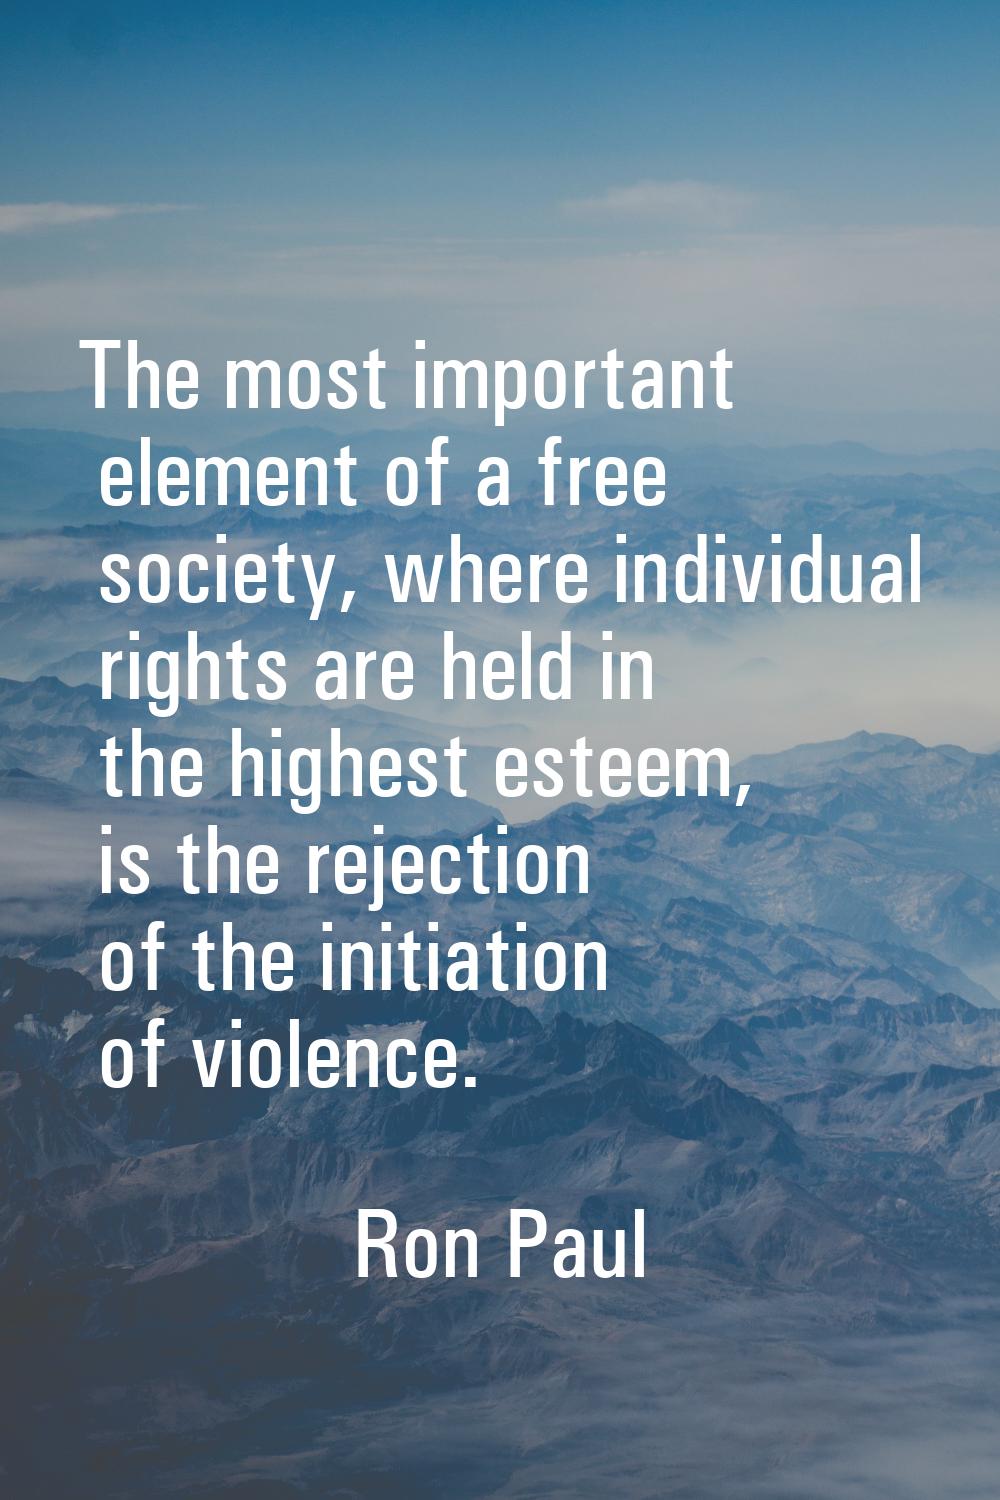 The most important element of a free society, where individual rights are held in the highest estee